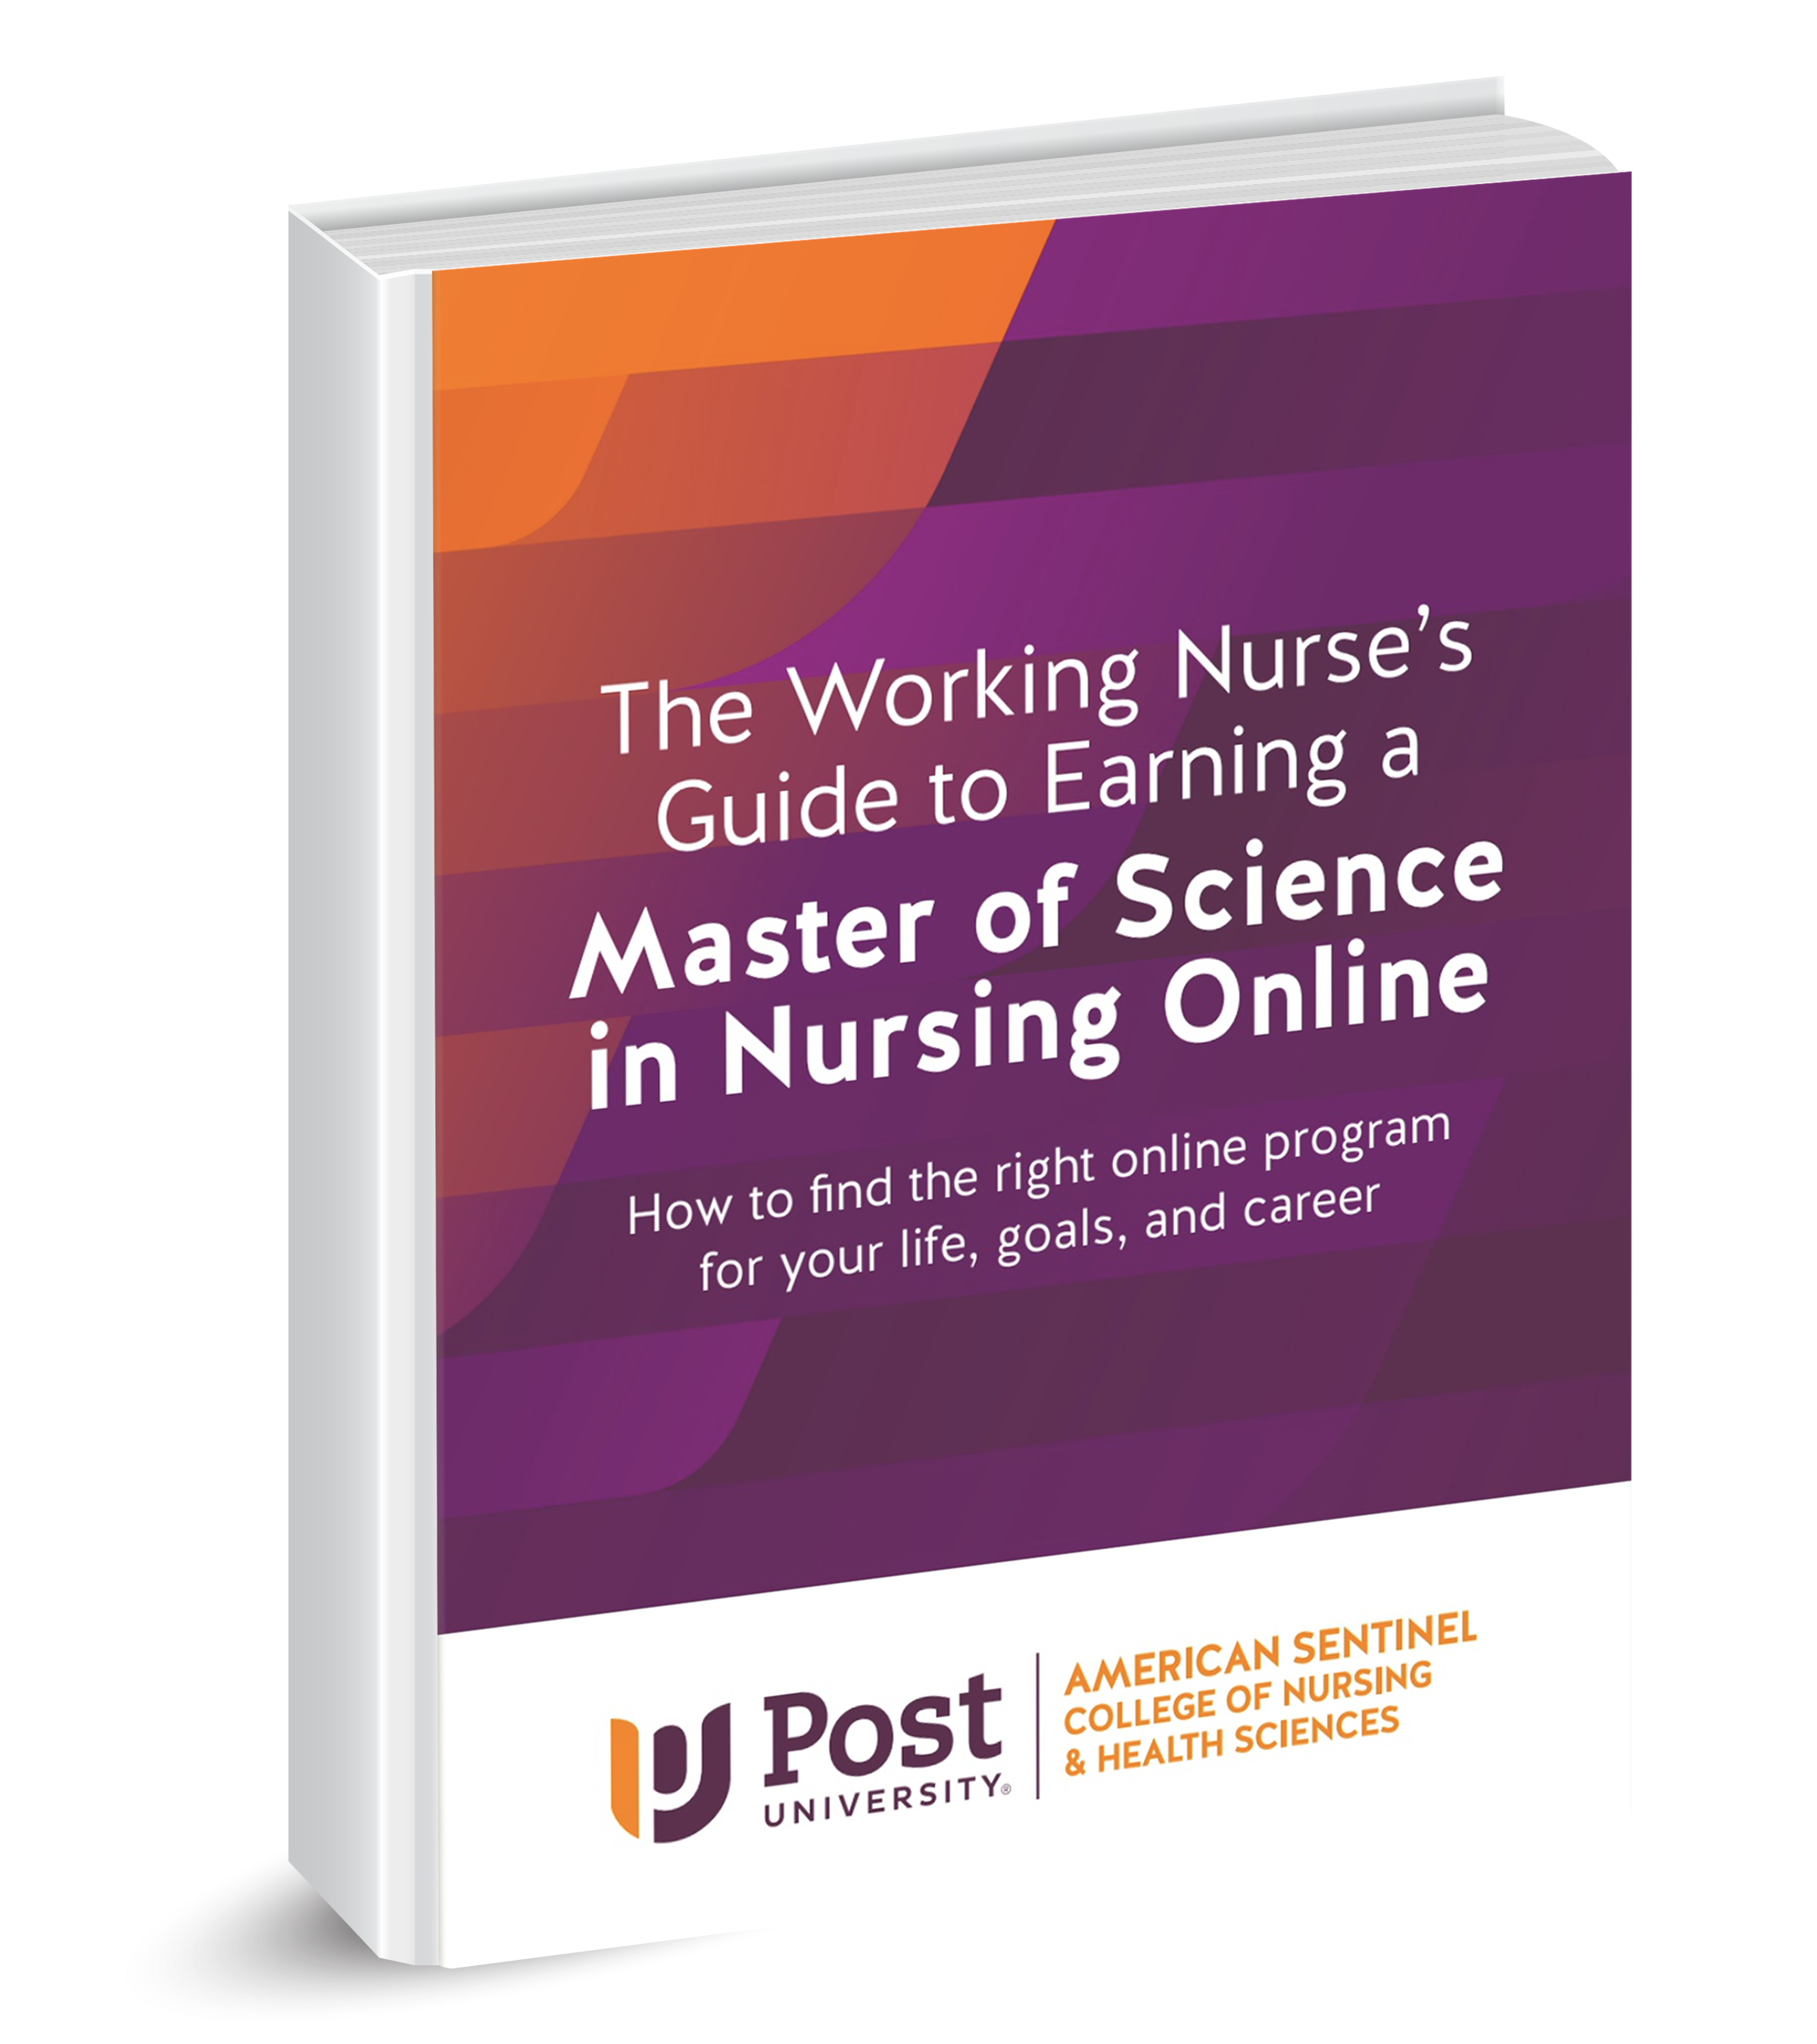 The Working Nurse's Guide to Earning a Master of Science in Nursing Online